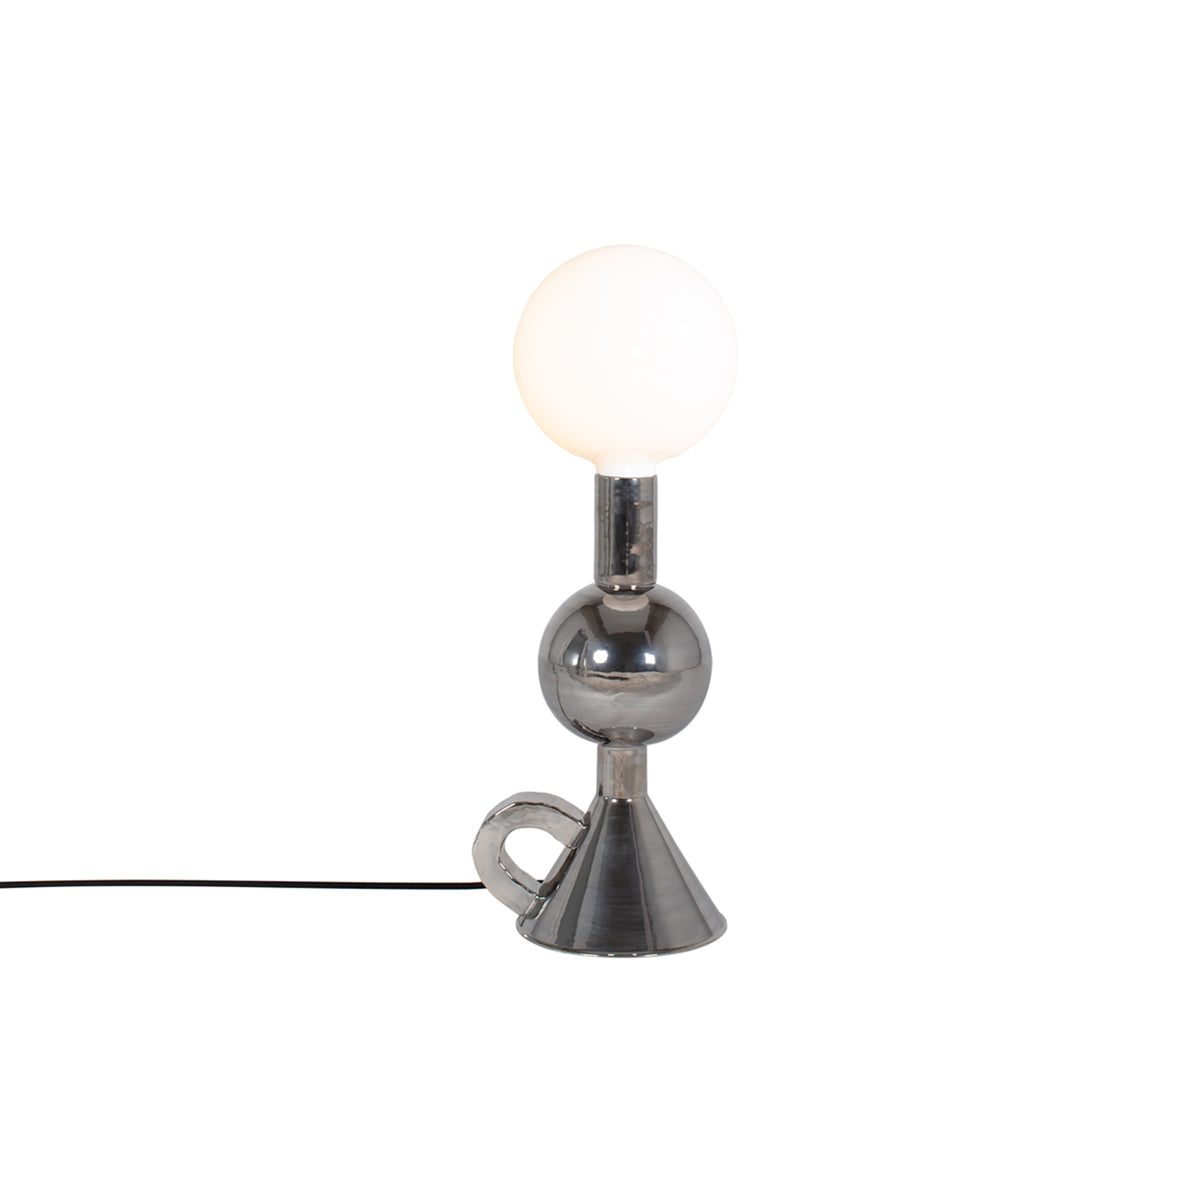 Flaming Stars Table Lamp: Lady Madonna + Silver